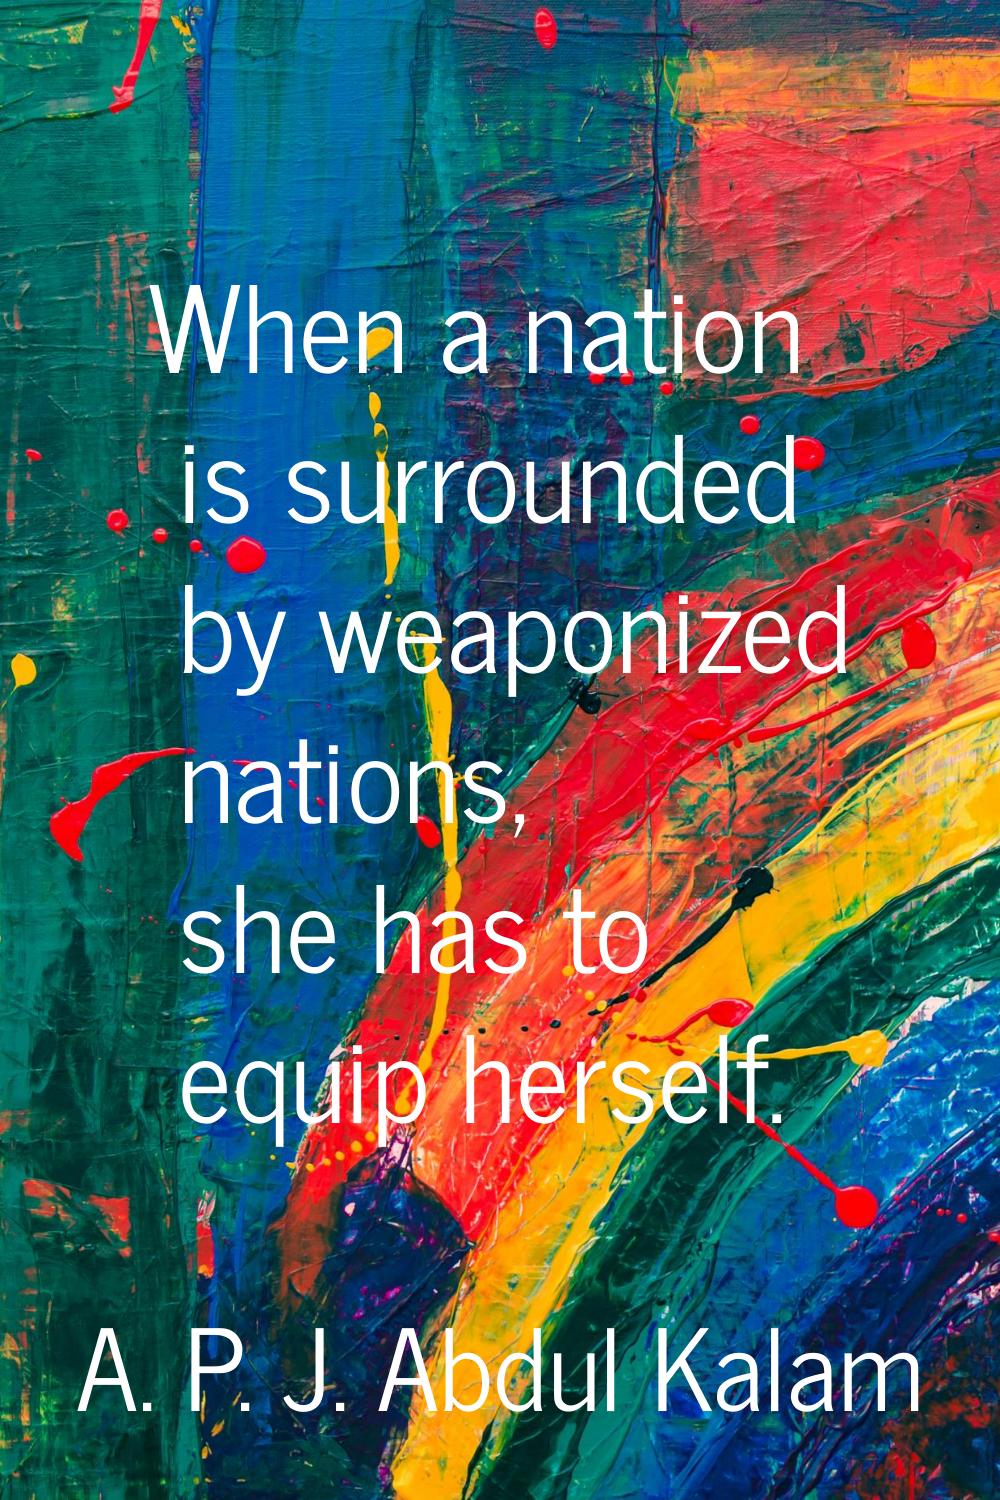 When a nation is surrounded by weaponized nations, she has to equip herself.